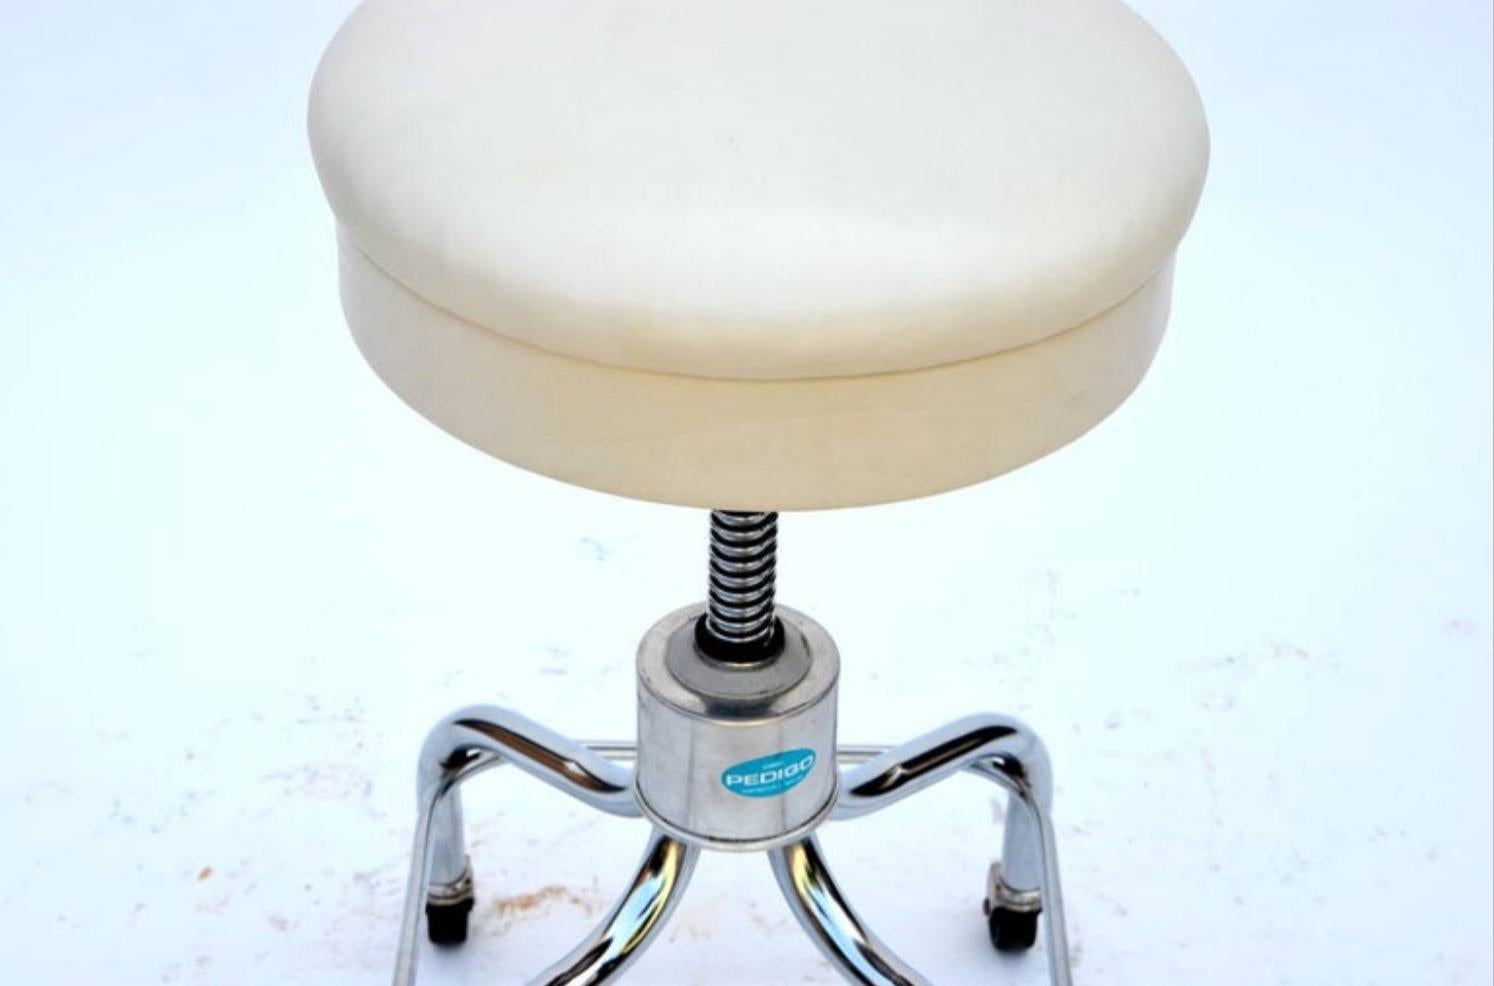 Set of Four Vintage Chrome and White Leather Adjustable Rolling Stools In Good Condition For Sale In Los Angeles, CA